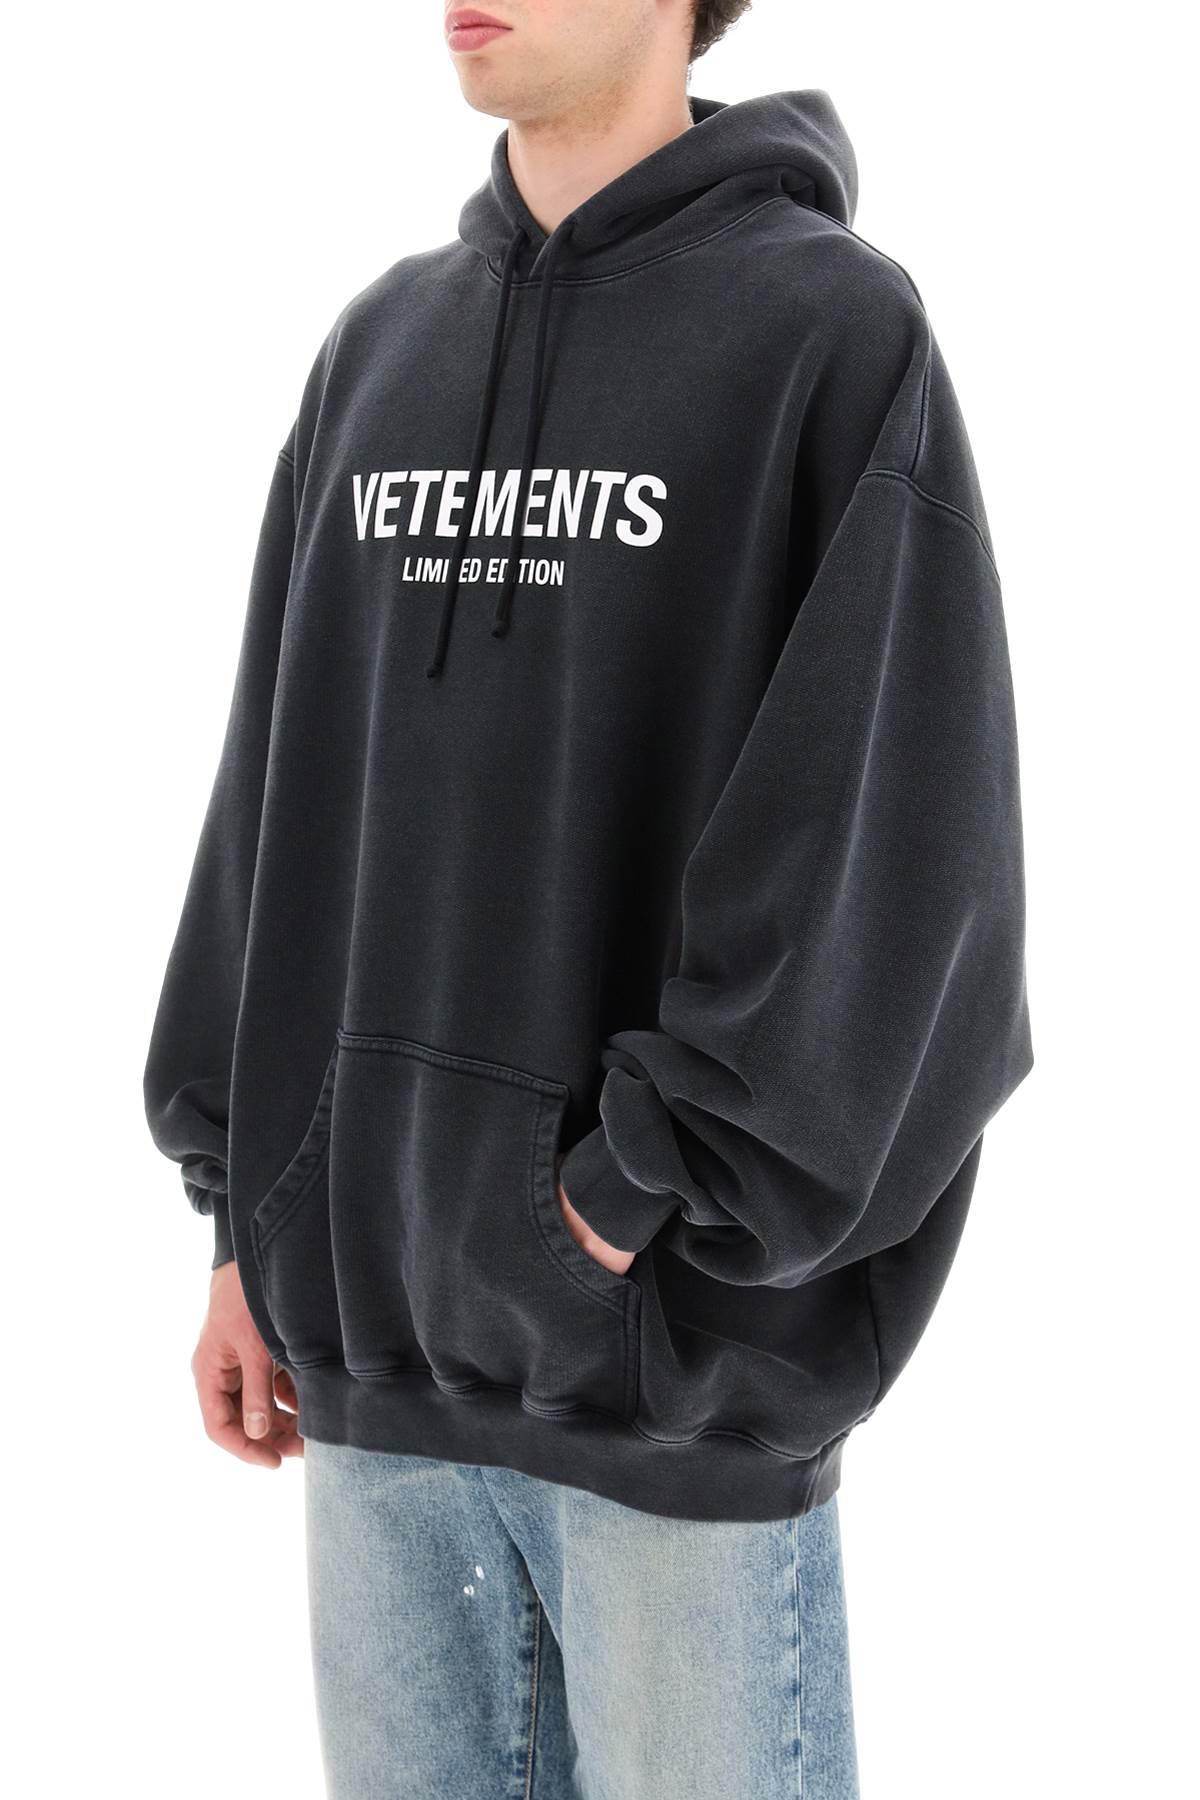 Vetements Limited Edition Logo Hoodie in Black for Men | Lyst